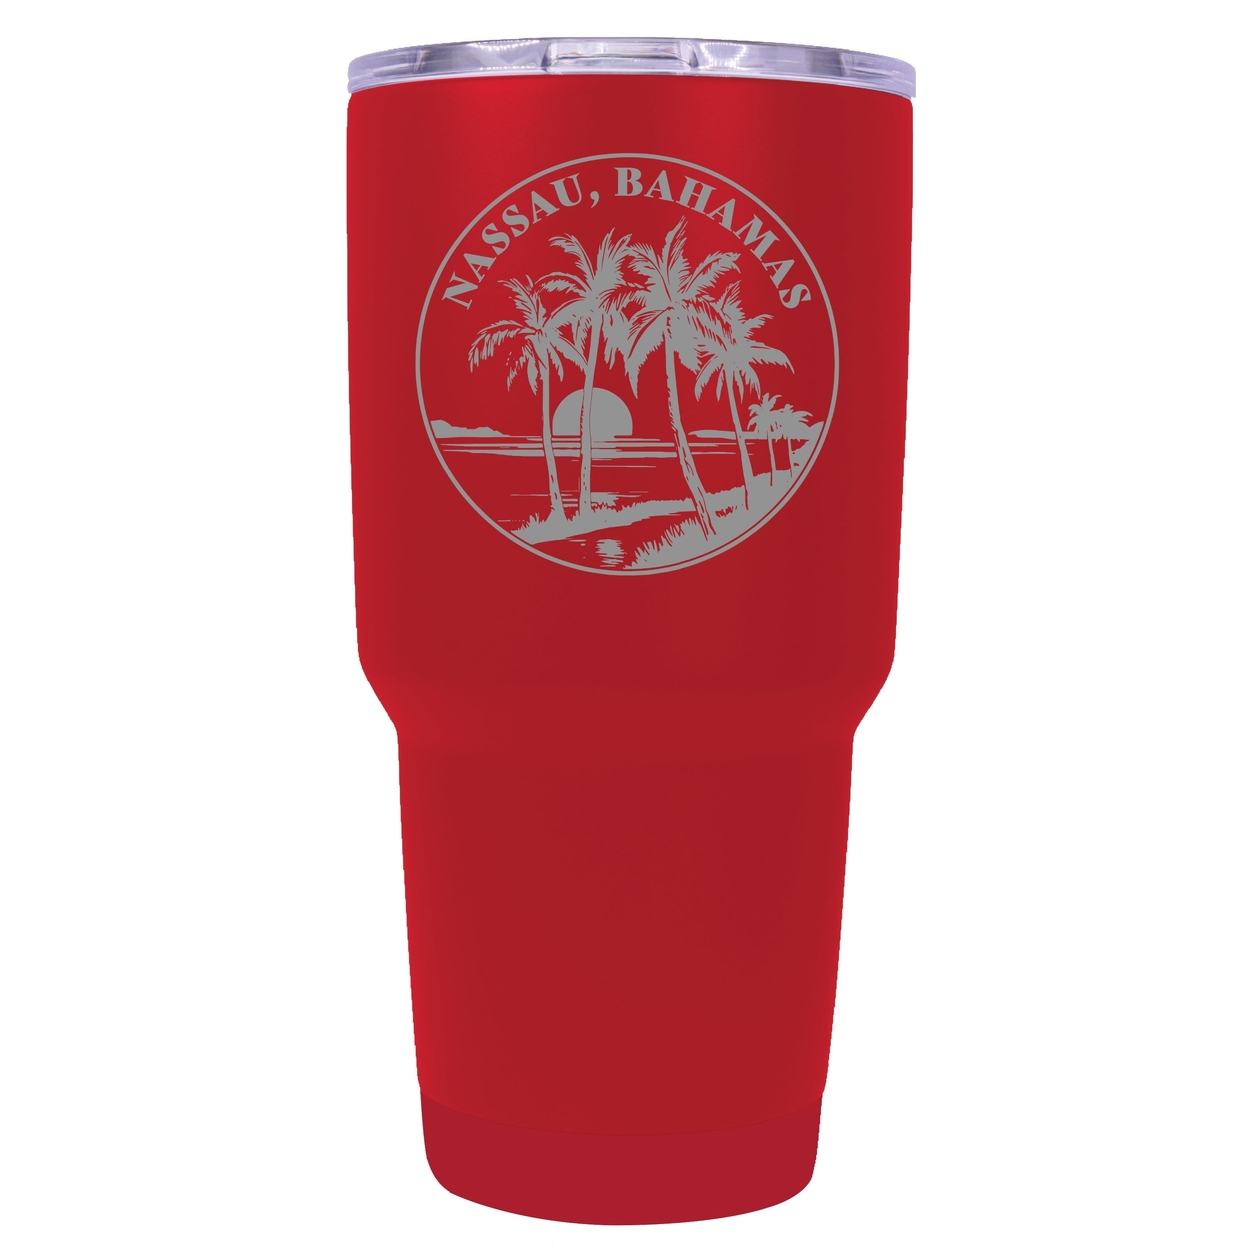 Nassau The Bahamas Souvenir 24 Oz Engraved Insulated Stainless Steel Tumbler - Red,,2-Pack